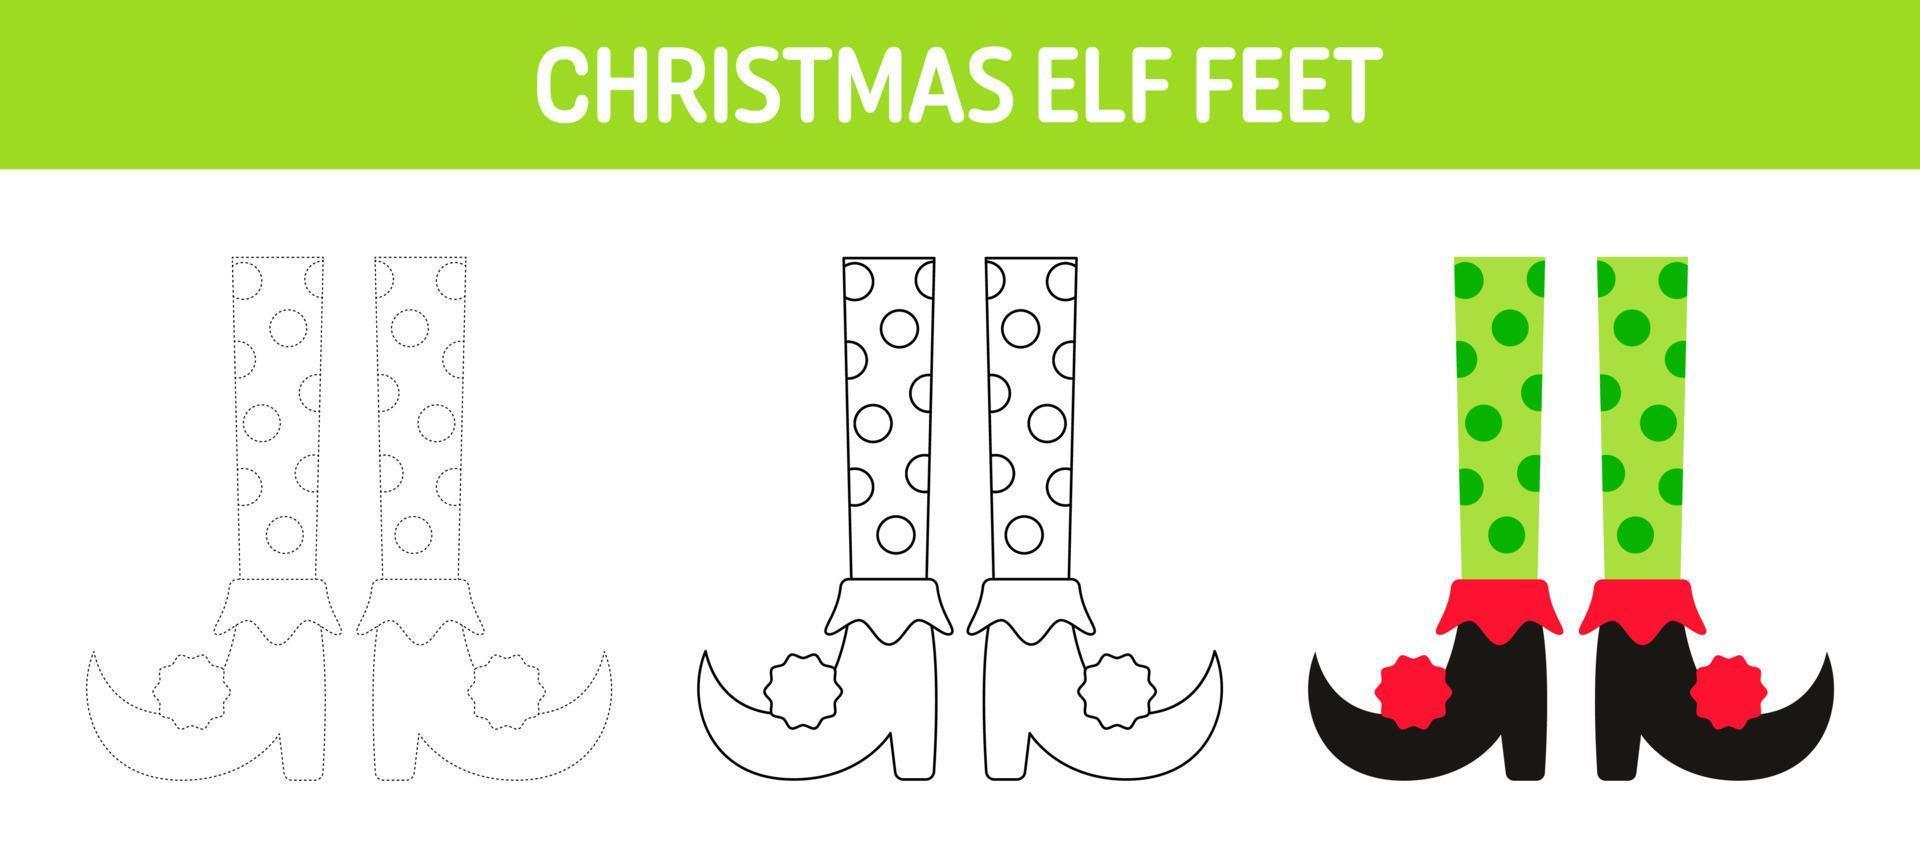 Christmas Elf Feet tracing and coloring worksheet for kids vector